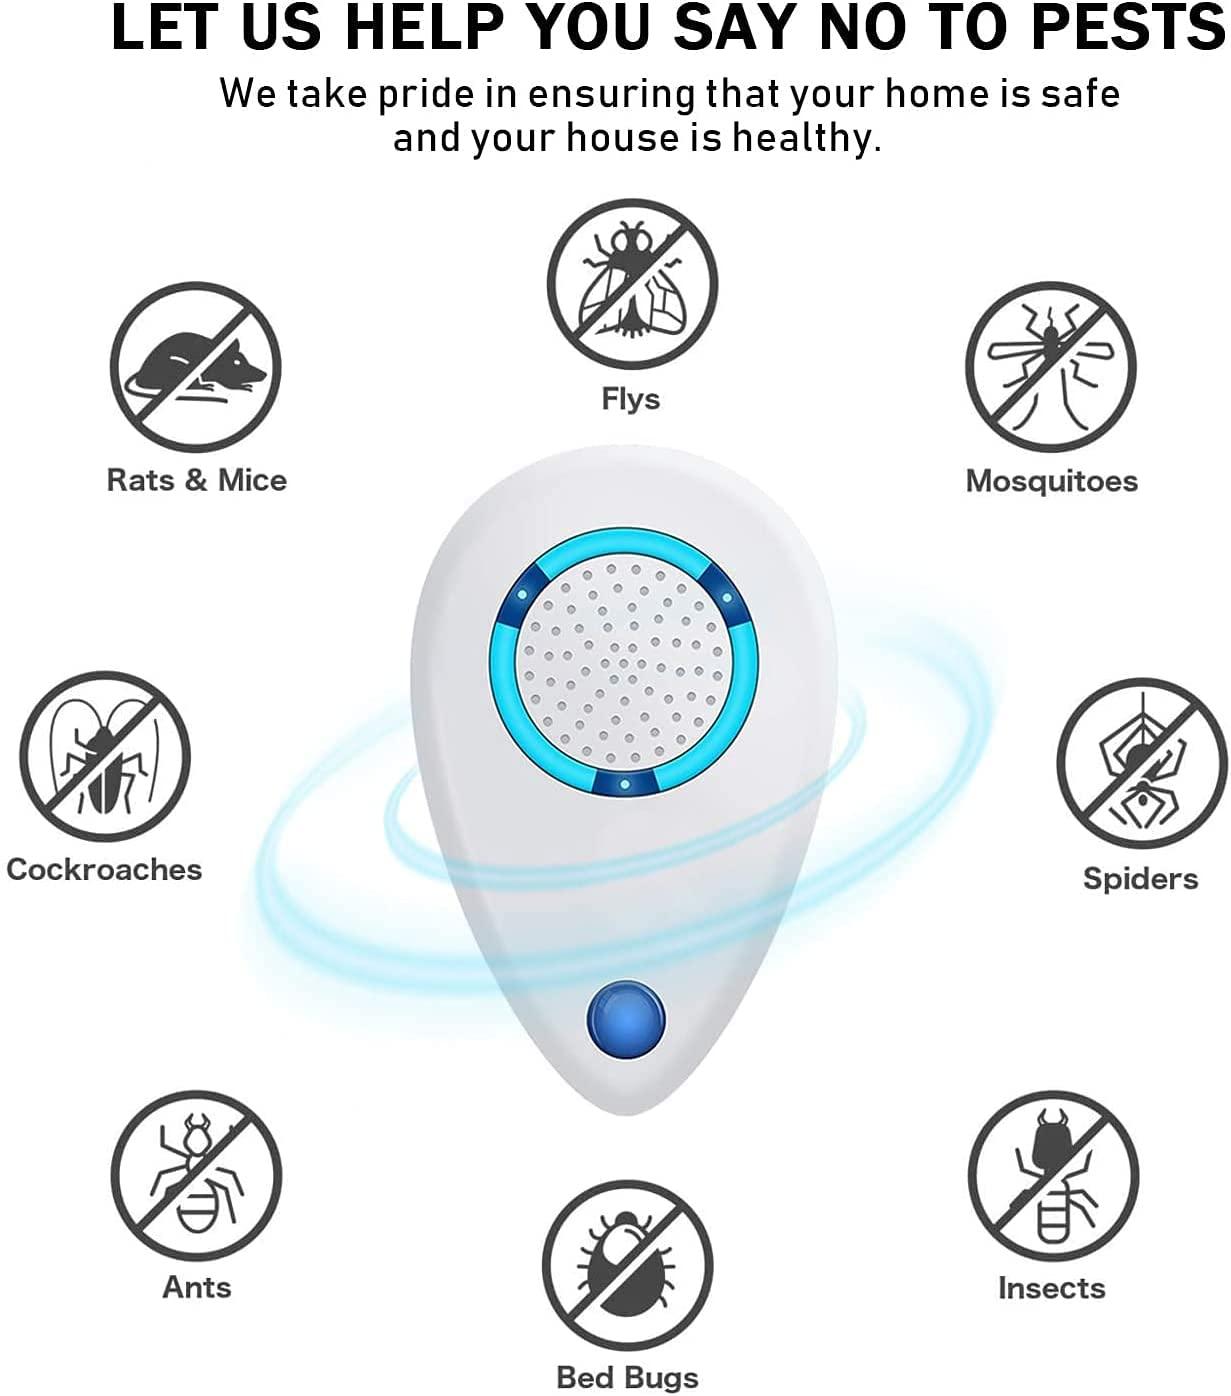 (6 Pack) Ultrasonic Pest Repeller, Electronic Plug in Sonic Repellent pest  Control for Insects Roaches Ant Mice Bugs Mouse Rodents Mosquitoes Spiders